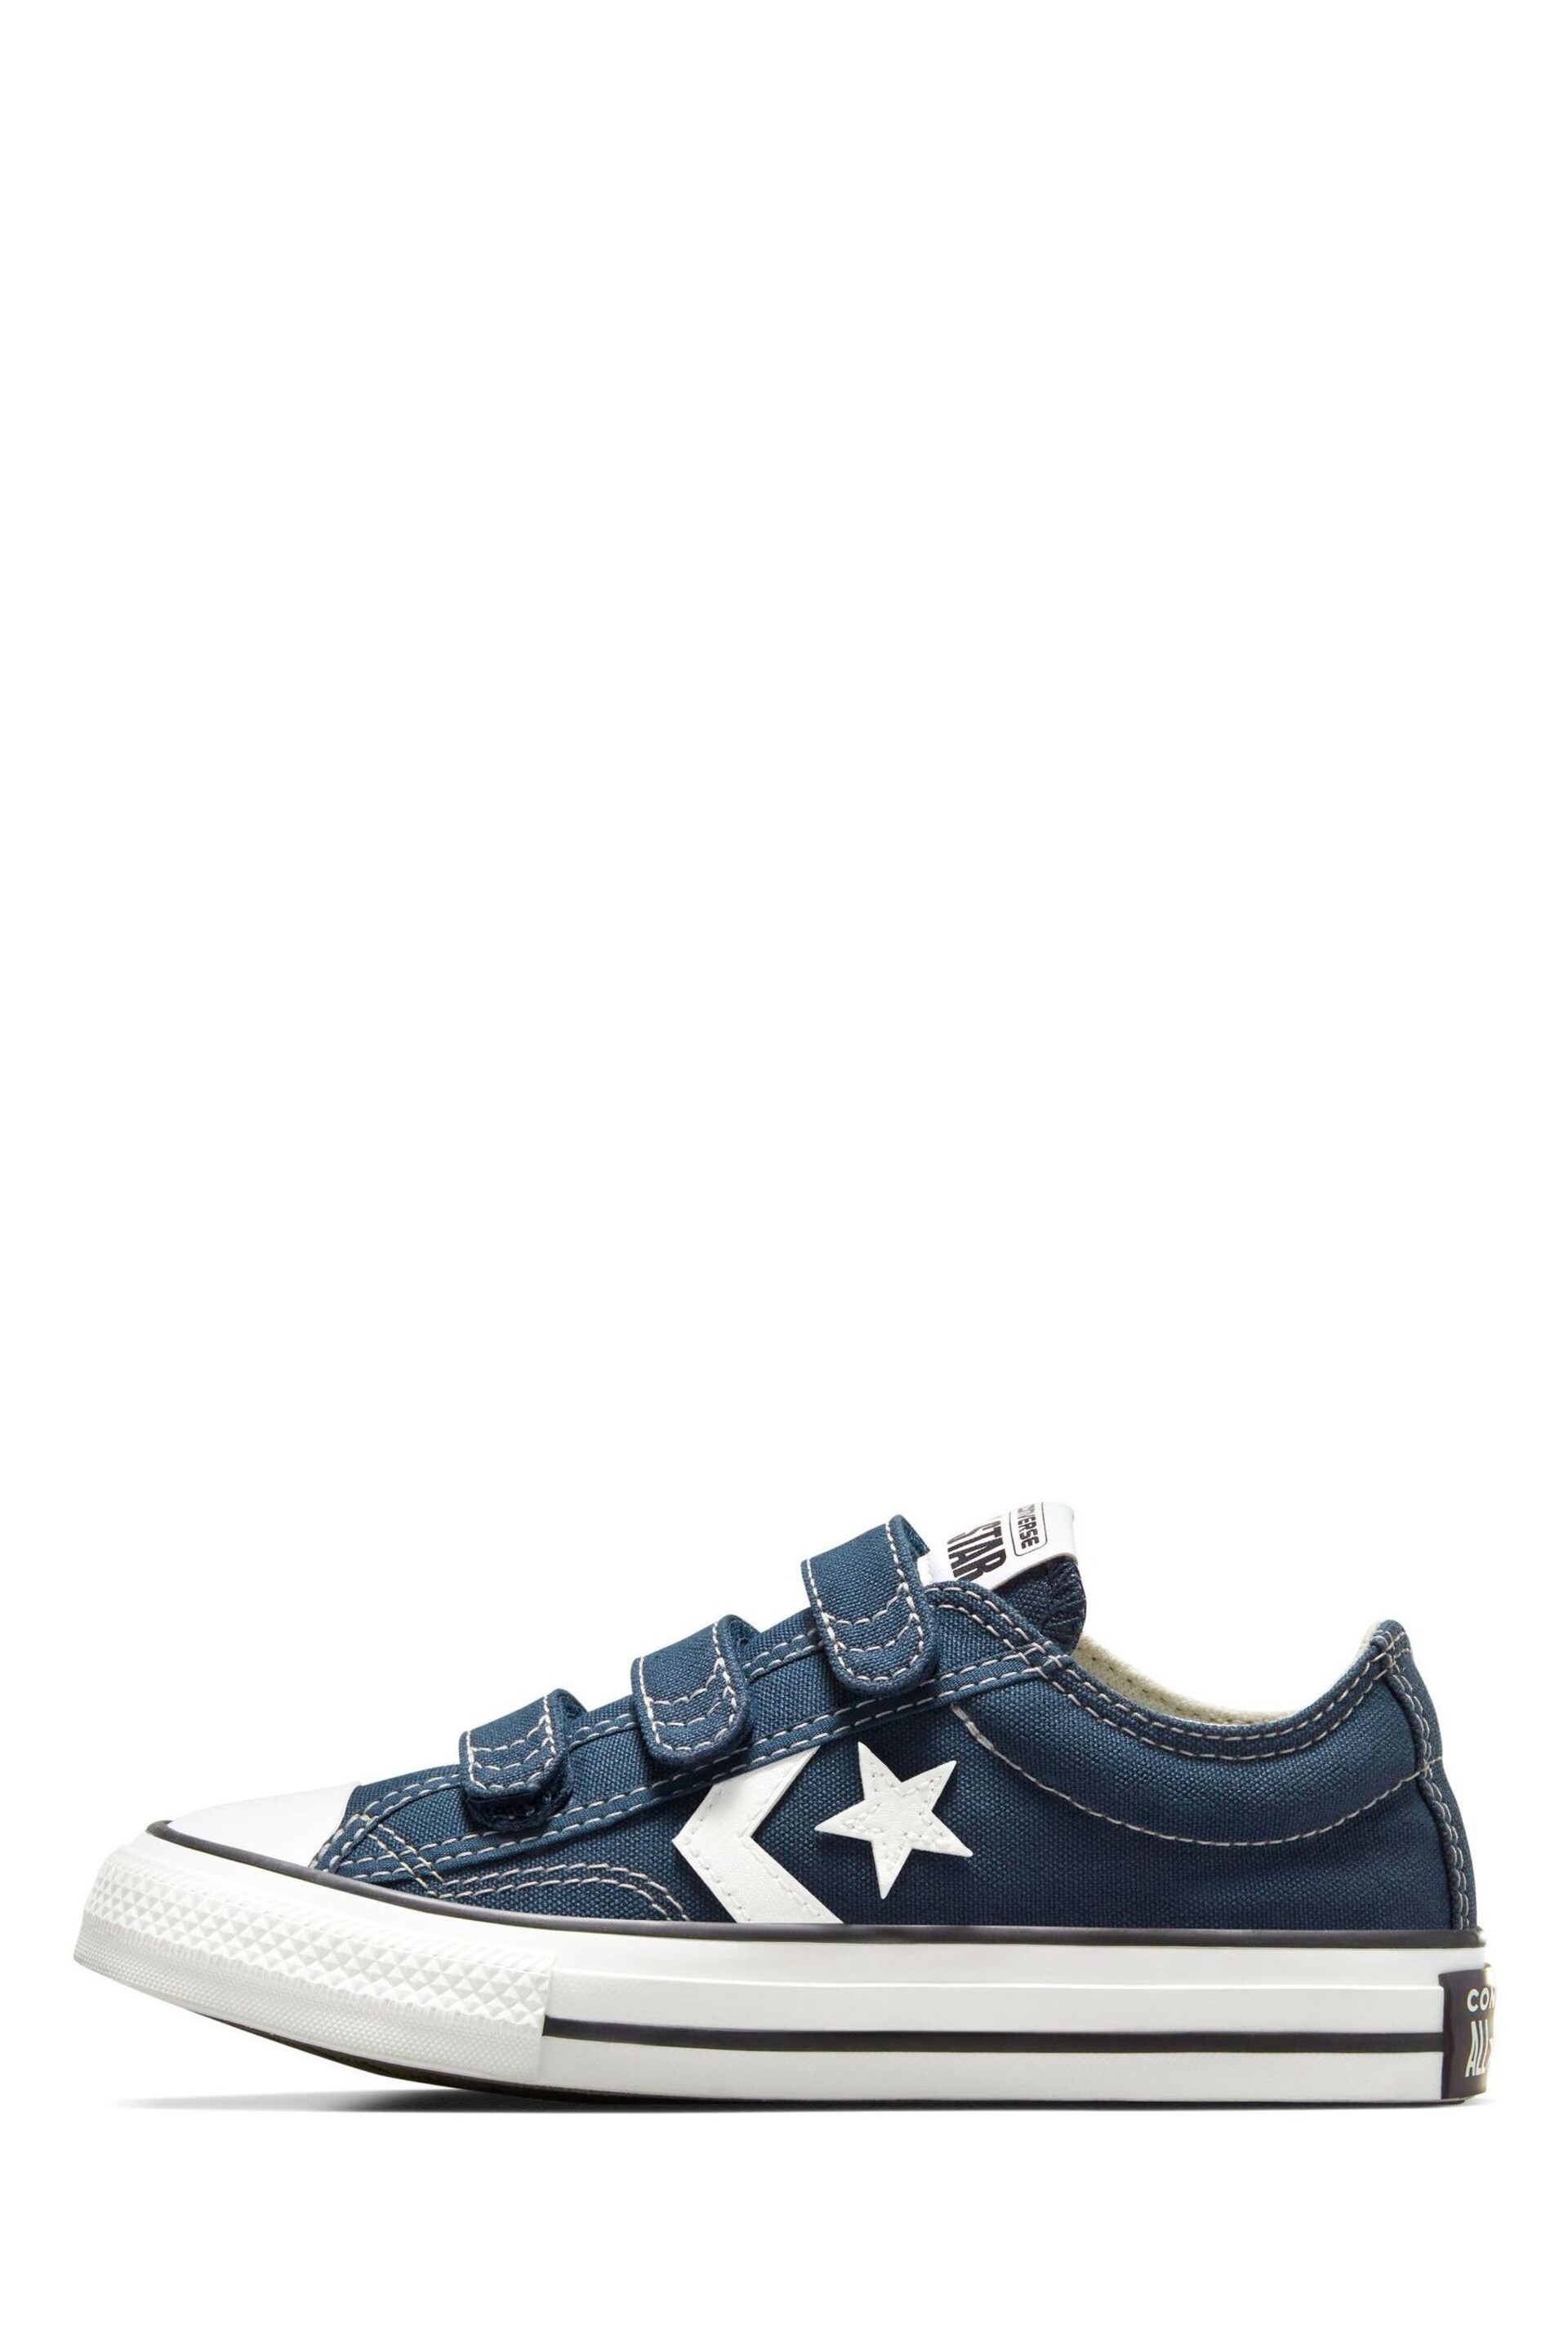 Converse Blue Junior Star Player 76 3V Easy On Trainers - Image 2 of 11